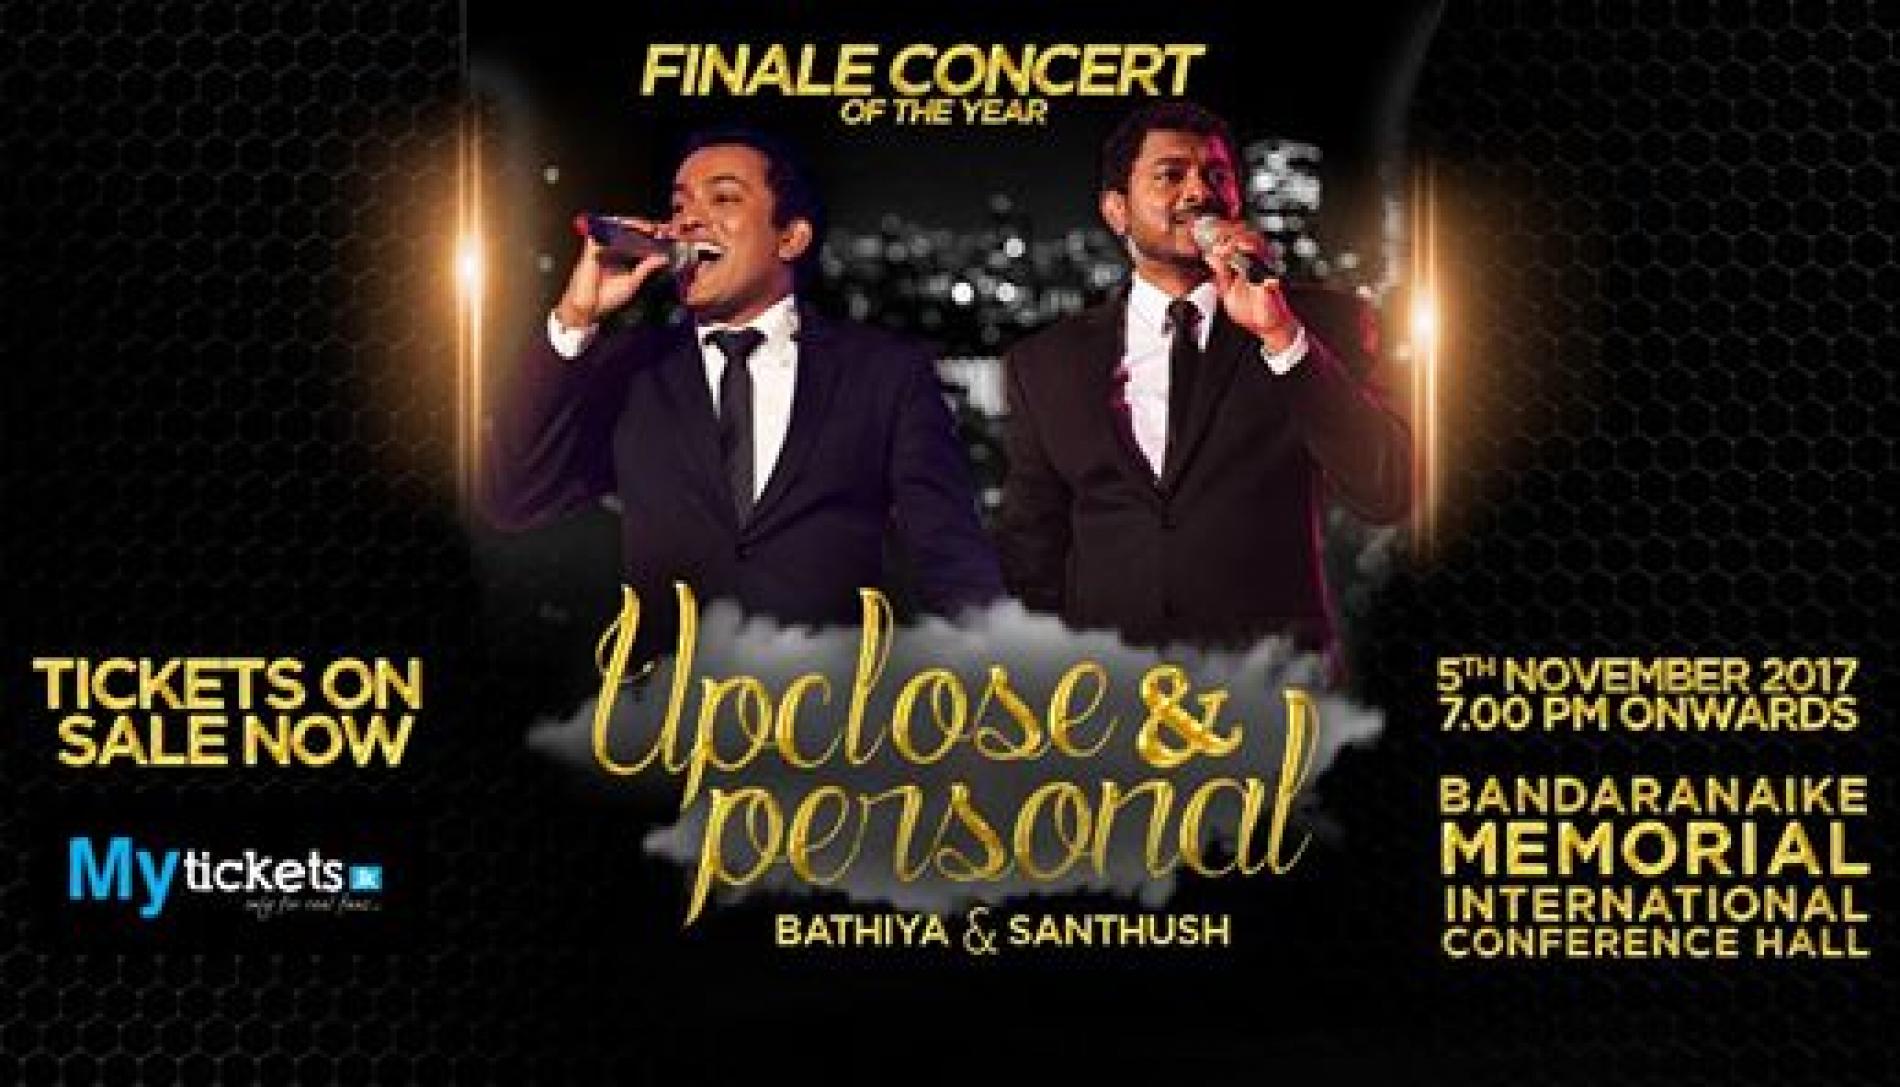 BnS – Upclose & Personal ( Finale Concert Of The Year)